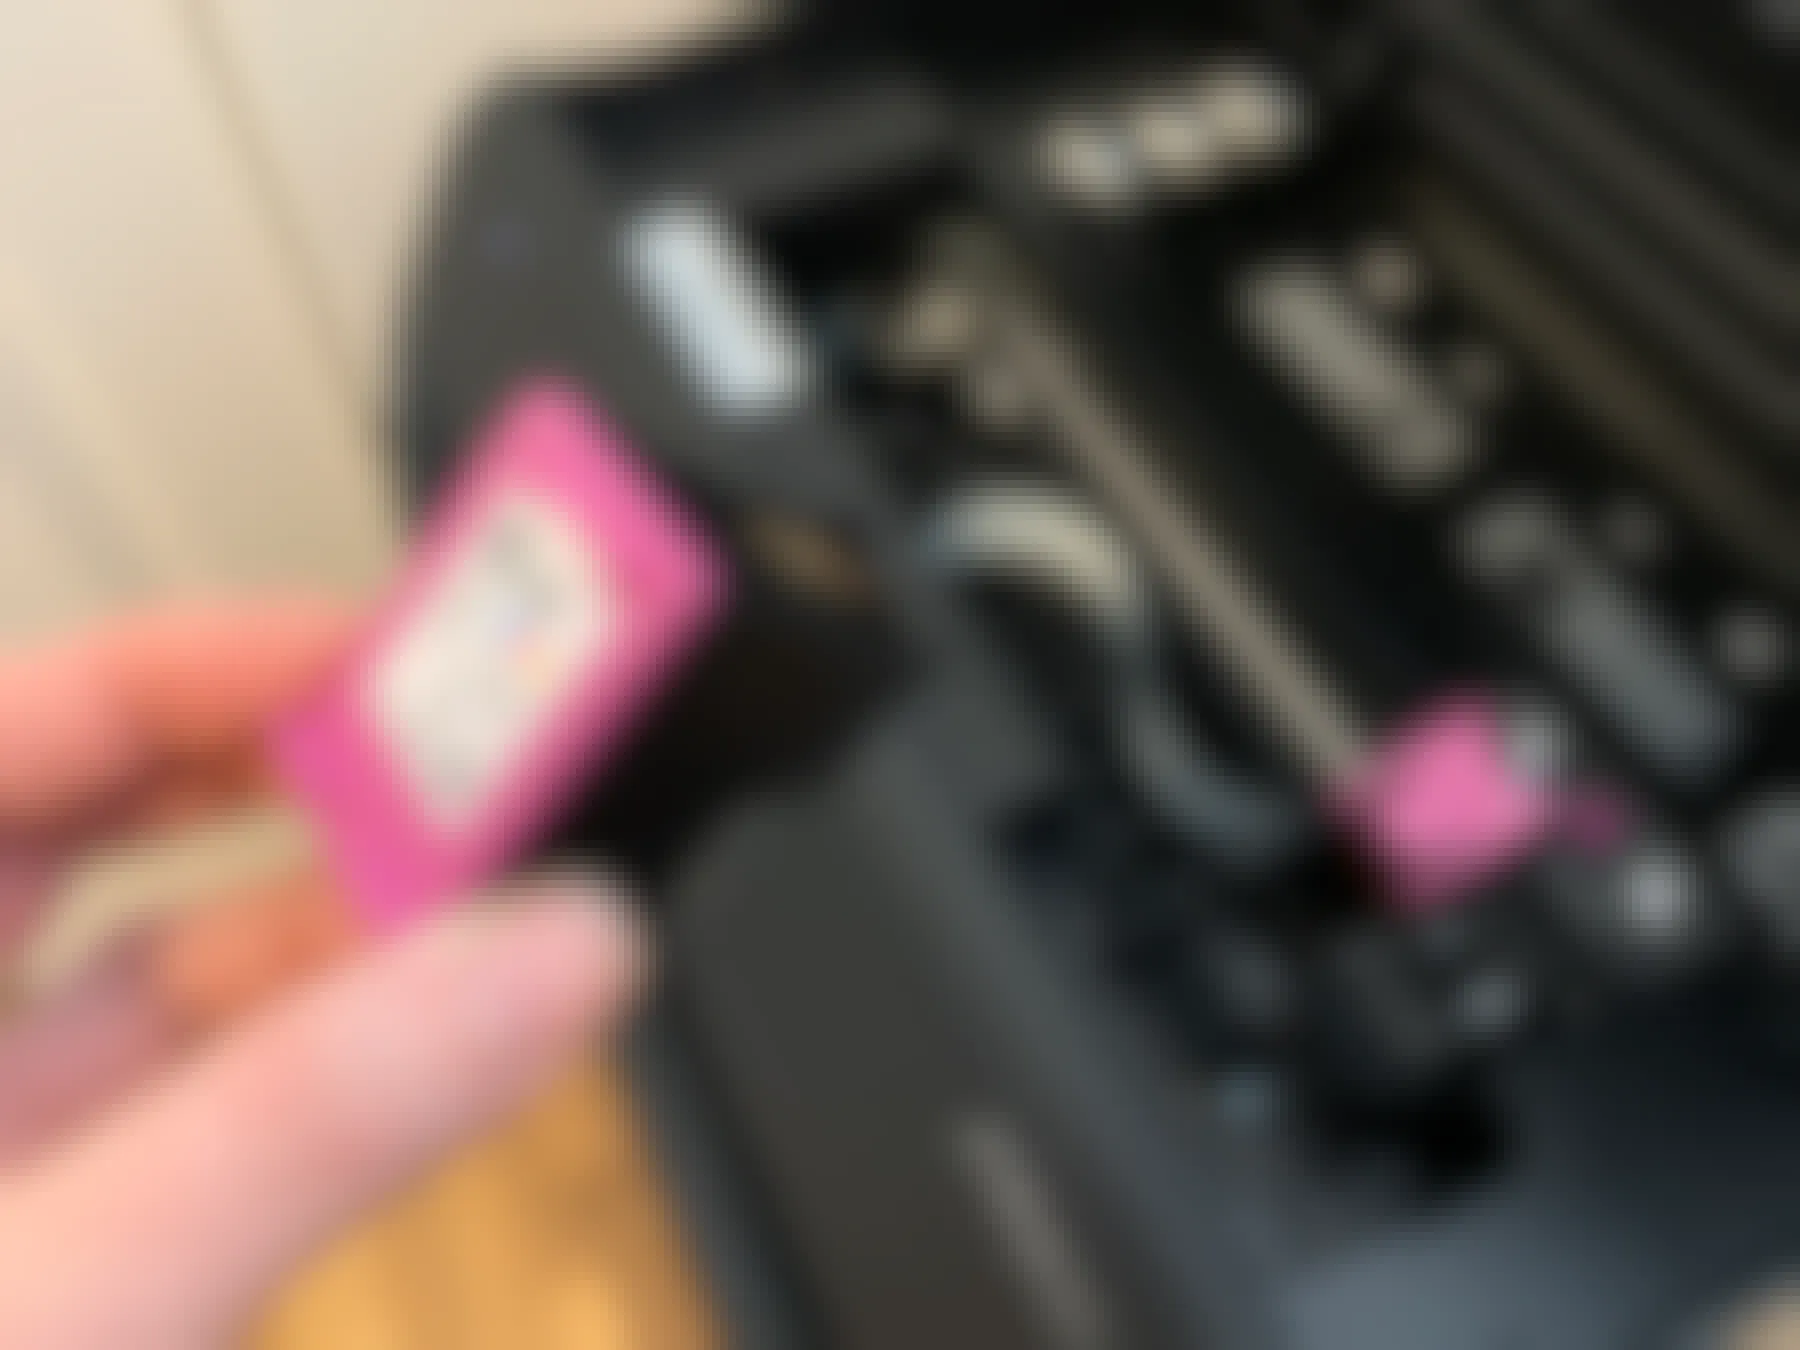 A hand holding an HP color printer ink cartridge in front of a printer.